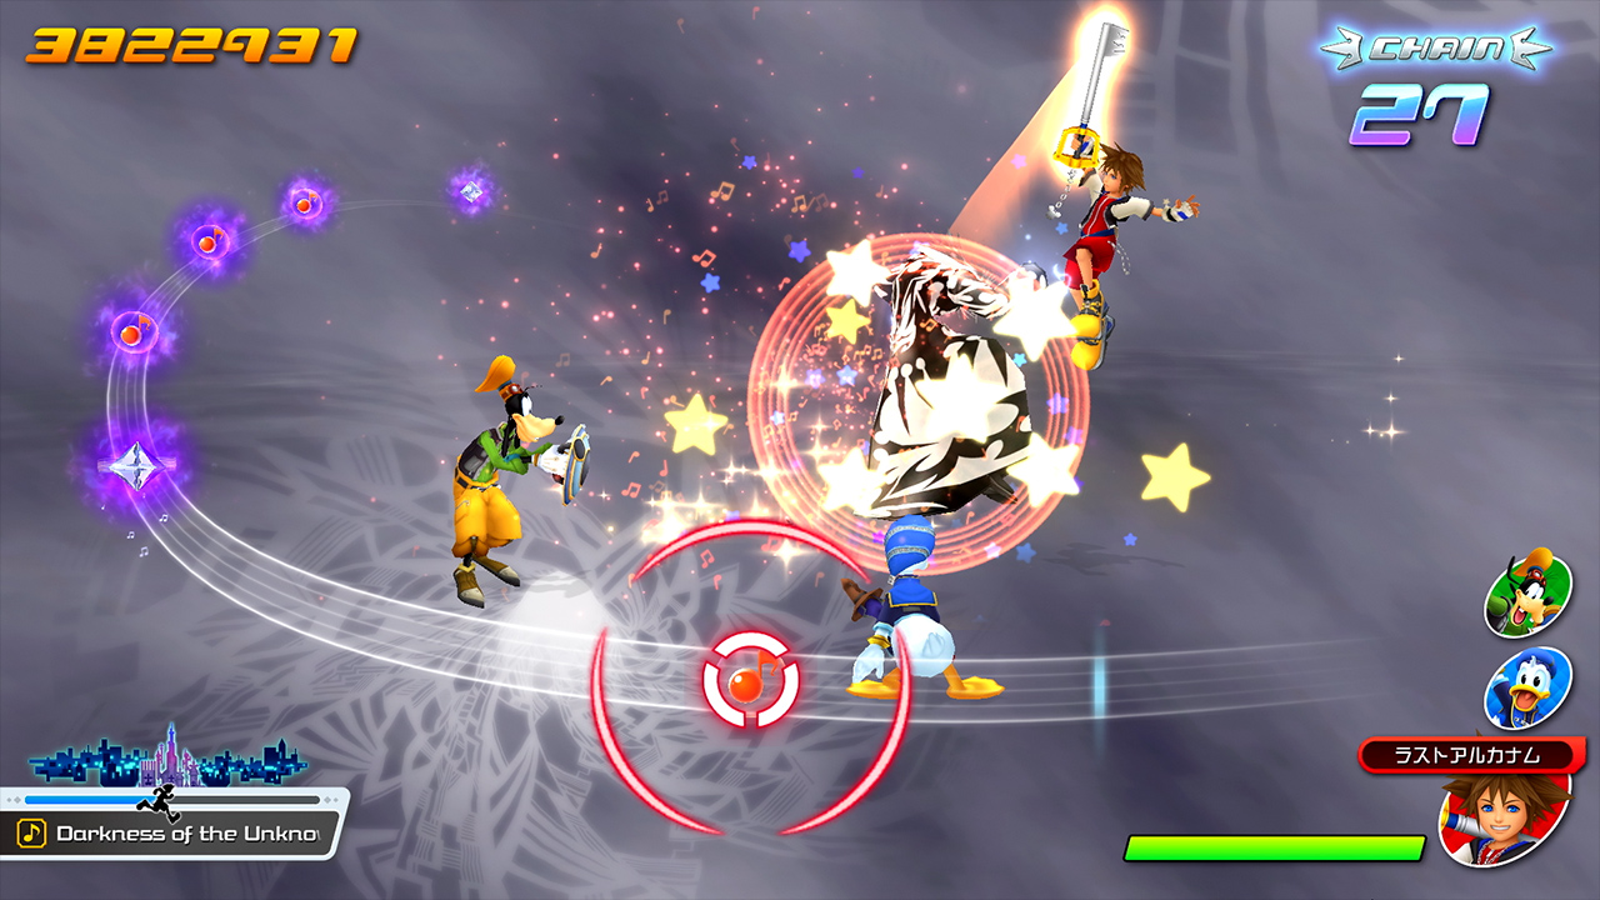 Kingdom Hearts: Melody of Memory Demo Impressions - Something for